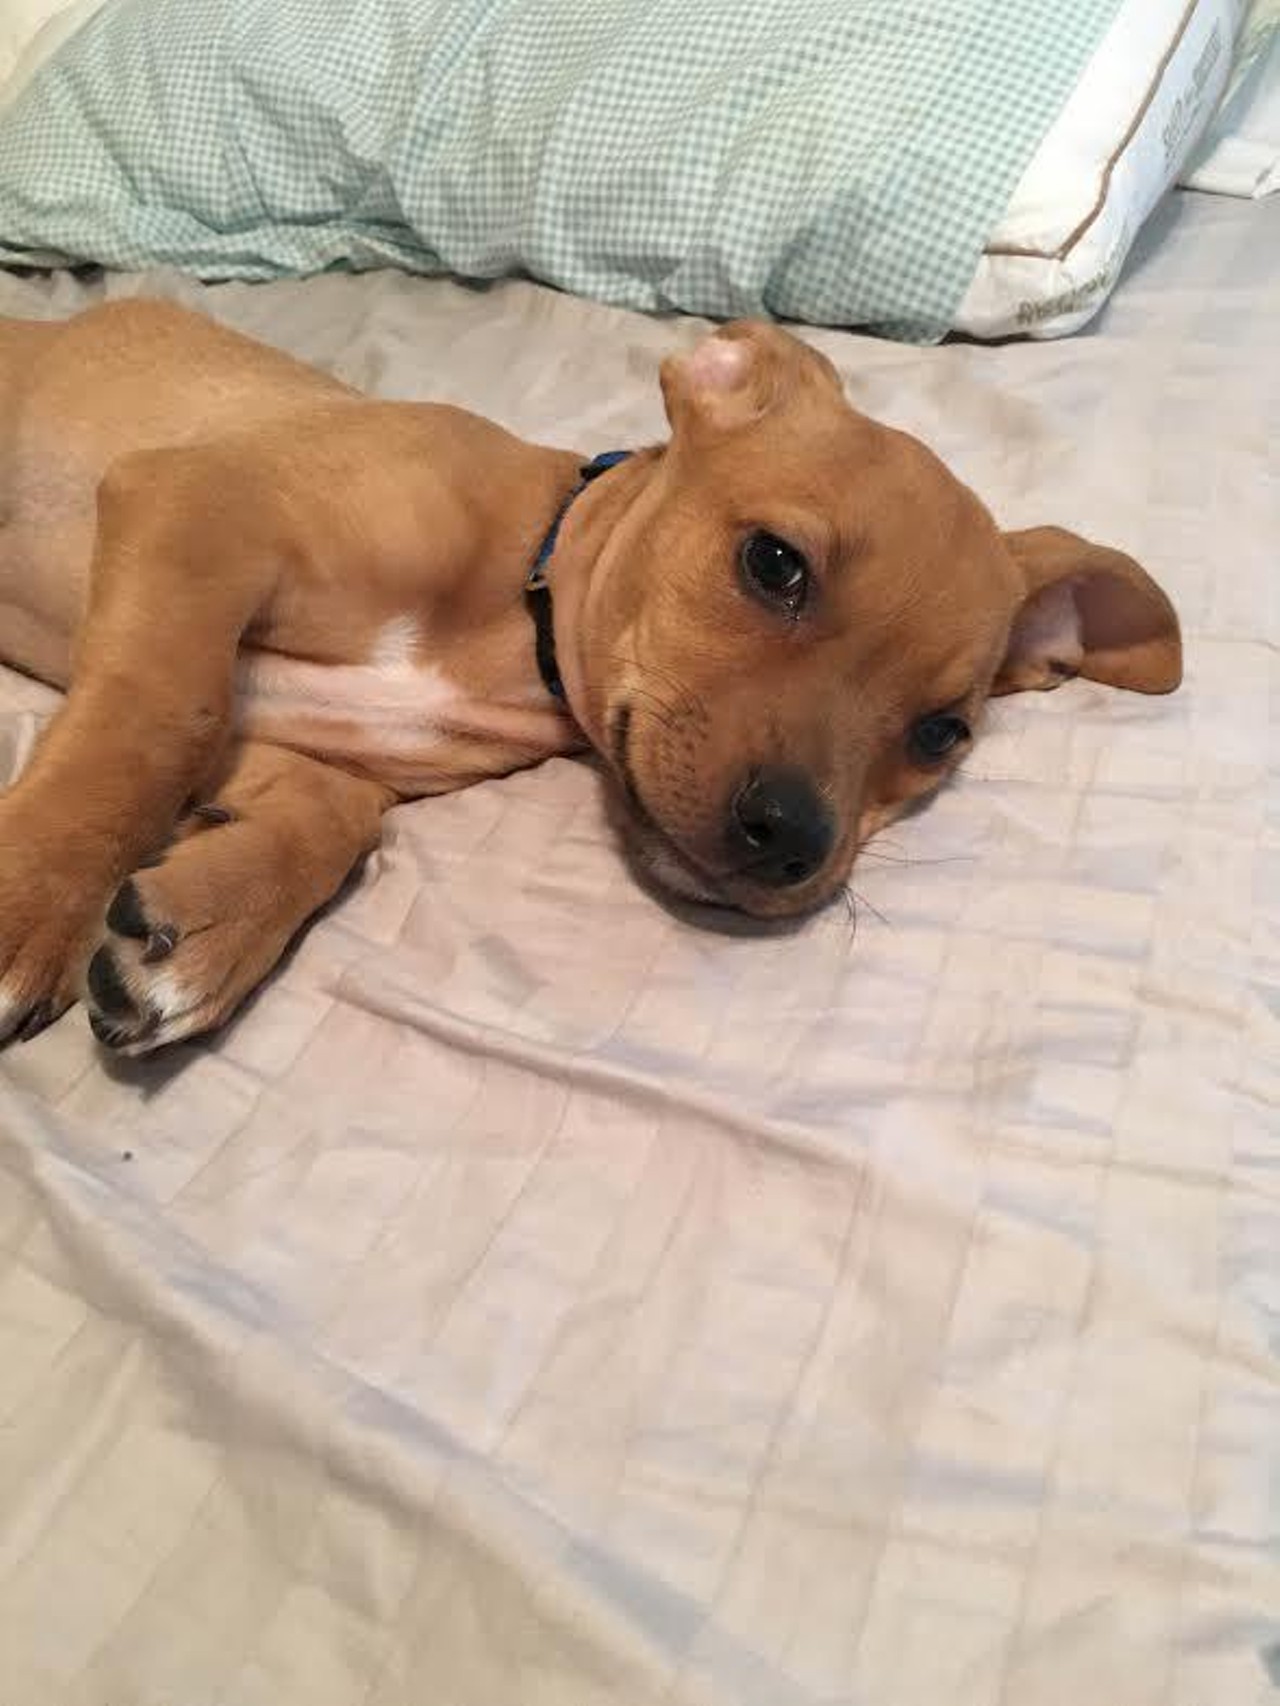  Prince
Shepherd and Labrador Retriever Mix Puppy| Male 
He literally looks like Scooby Doo but a puppy. So Scrappy Doo.